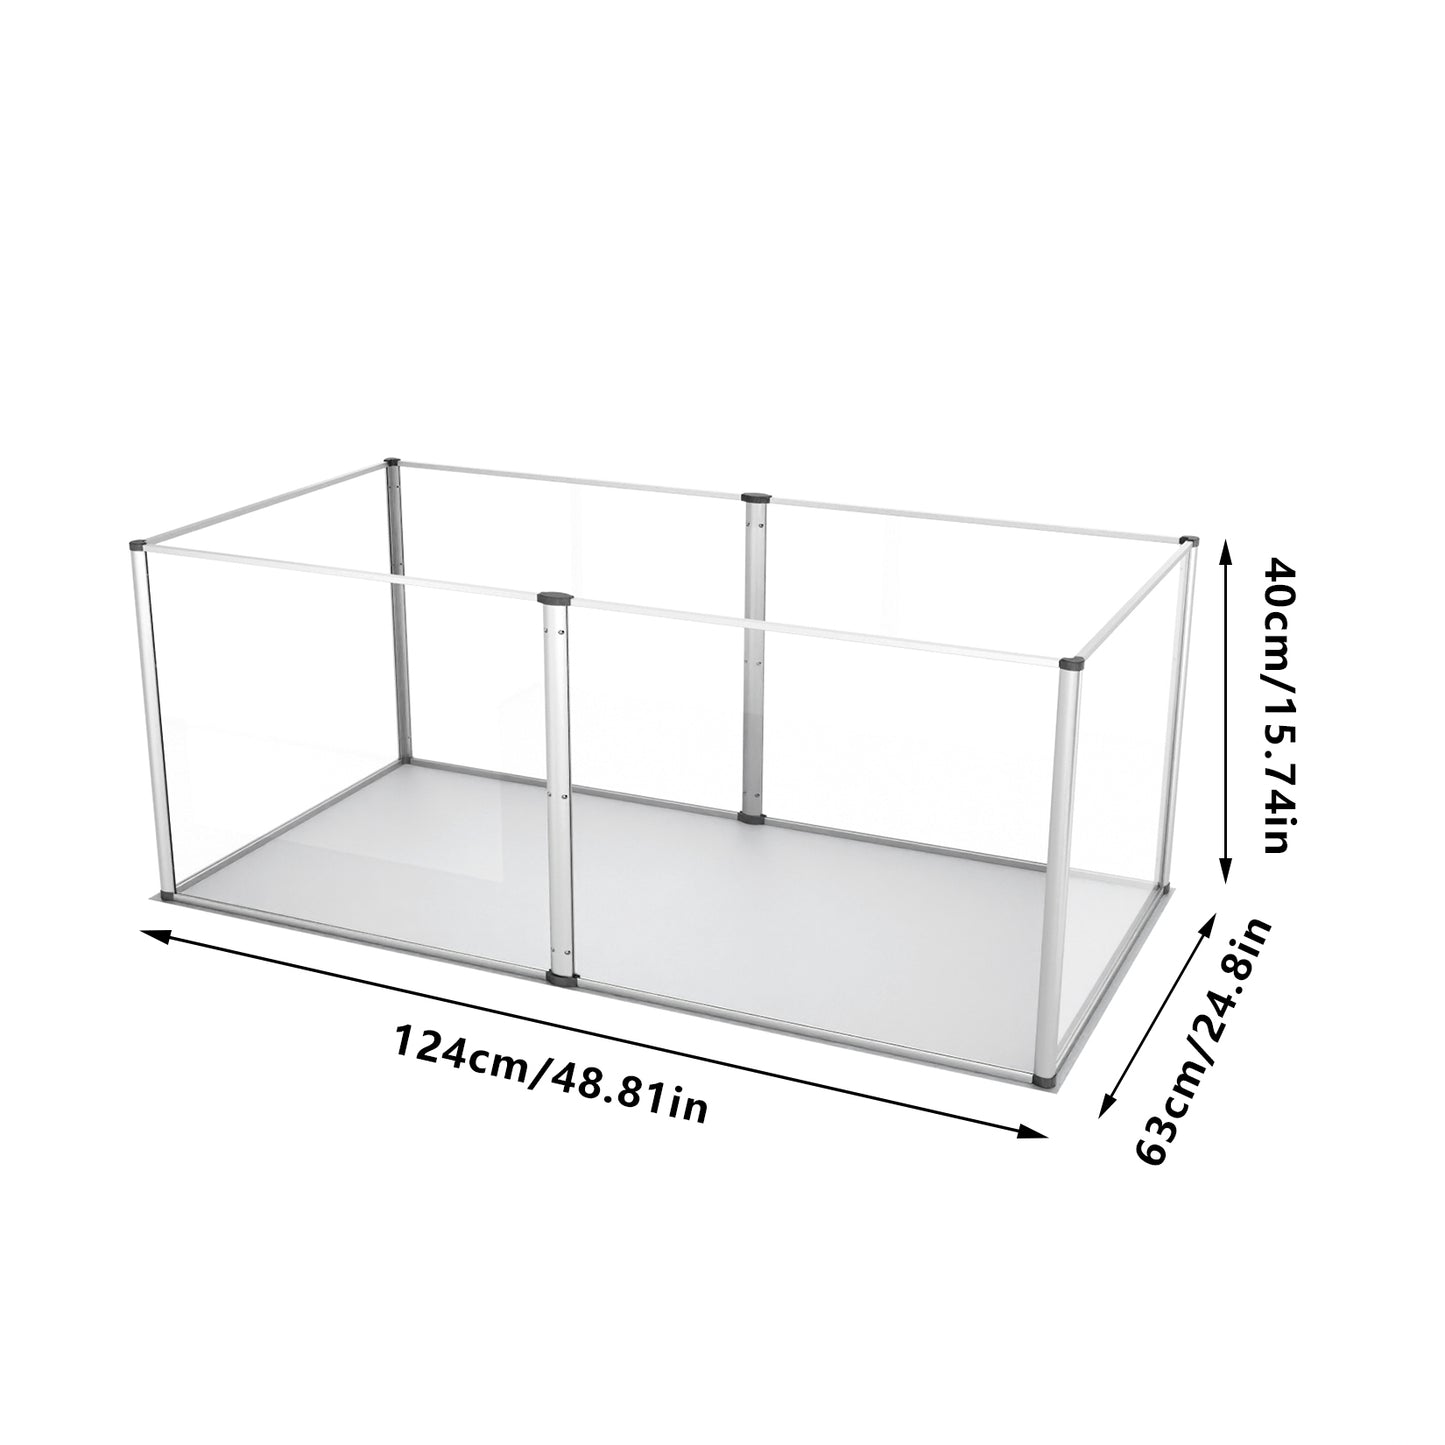 6 Panels Clear Acrylic Playpen Cage Small Animals Guinea Pig Hamster Yard Fence